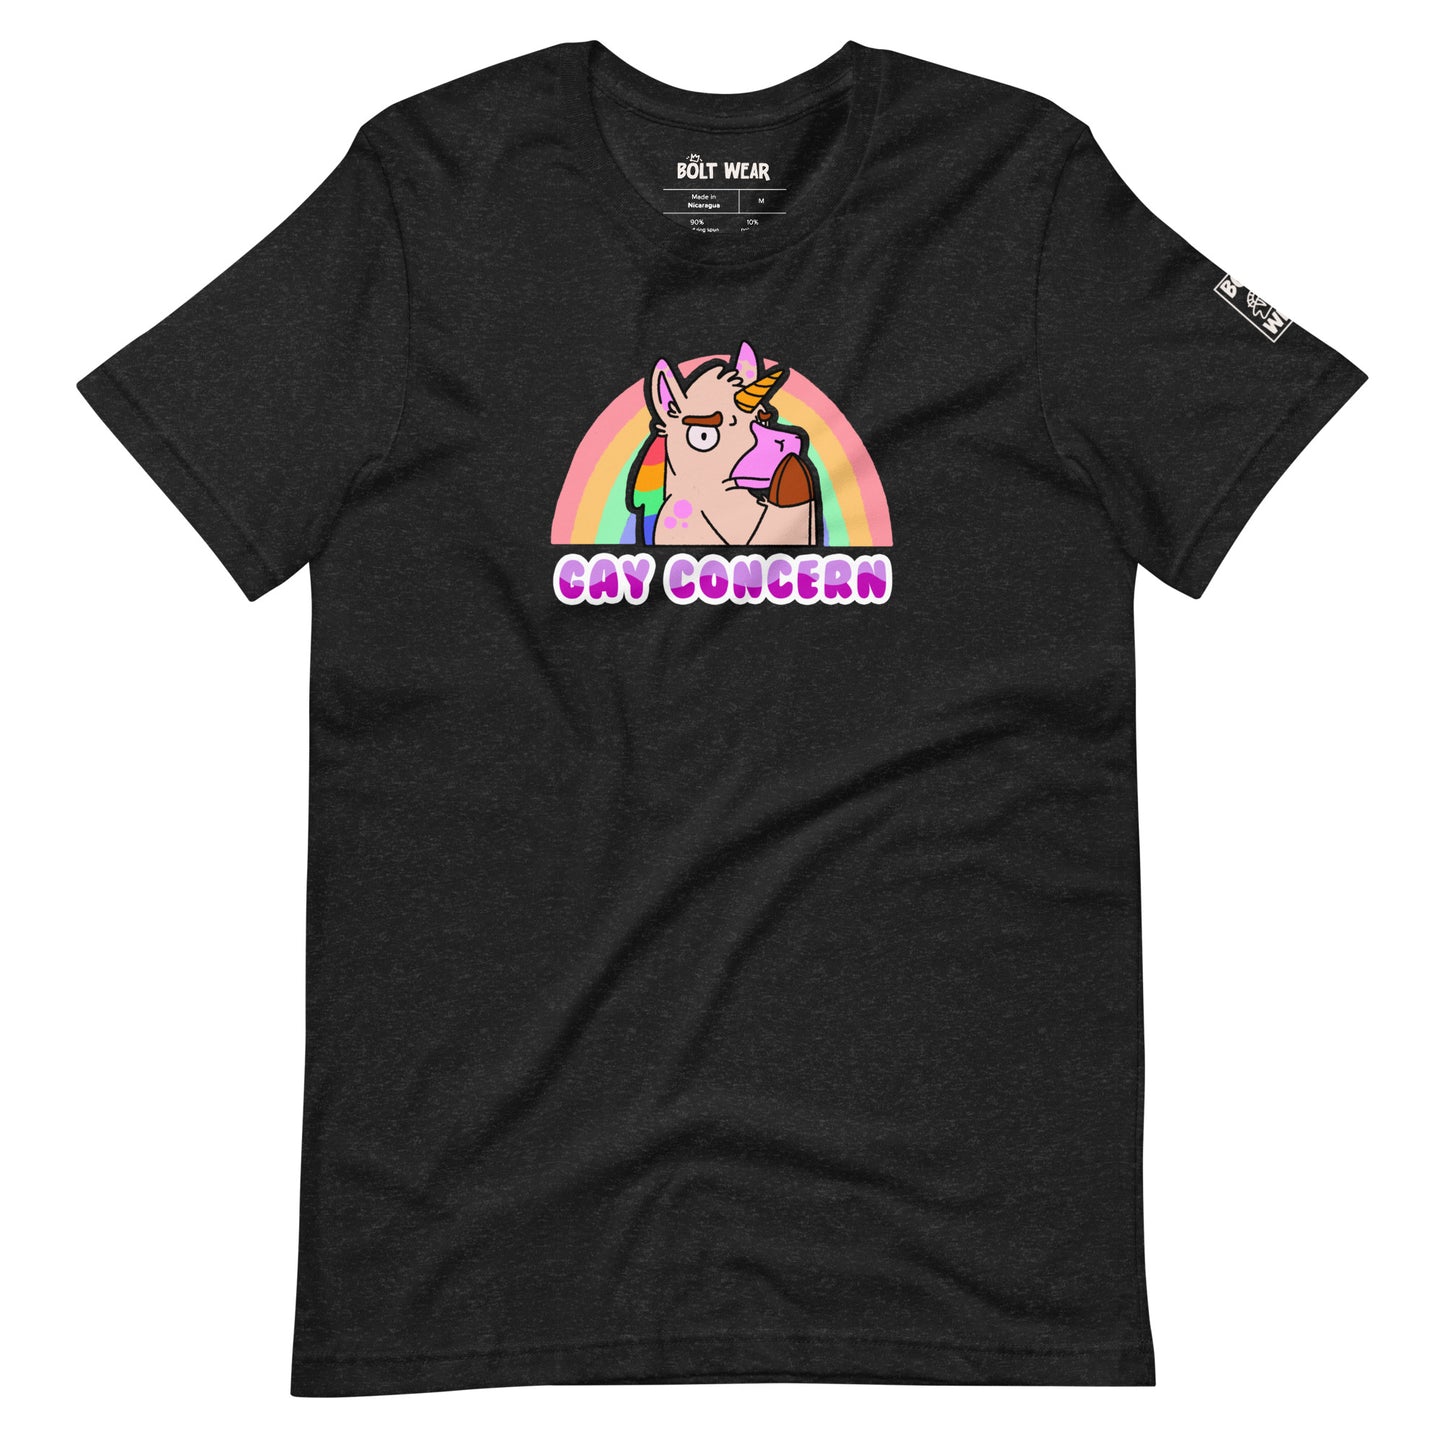 Black heather Gay Concern t-shirt featuring unicorn in concerned pose with rainbow behind.